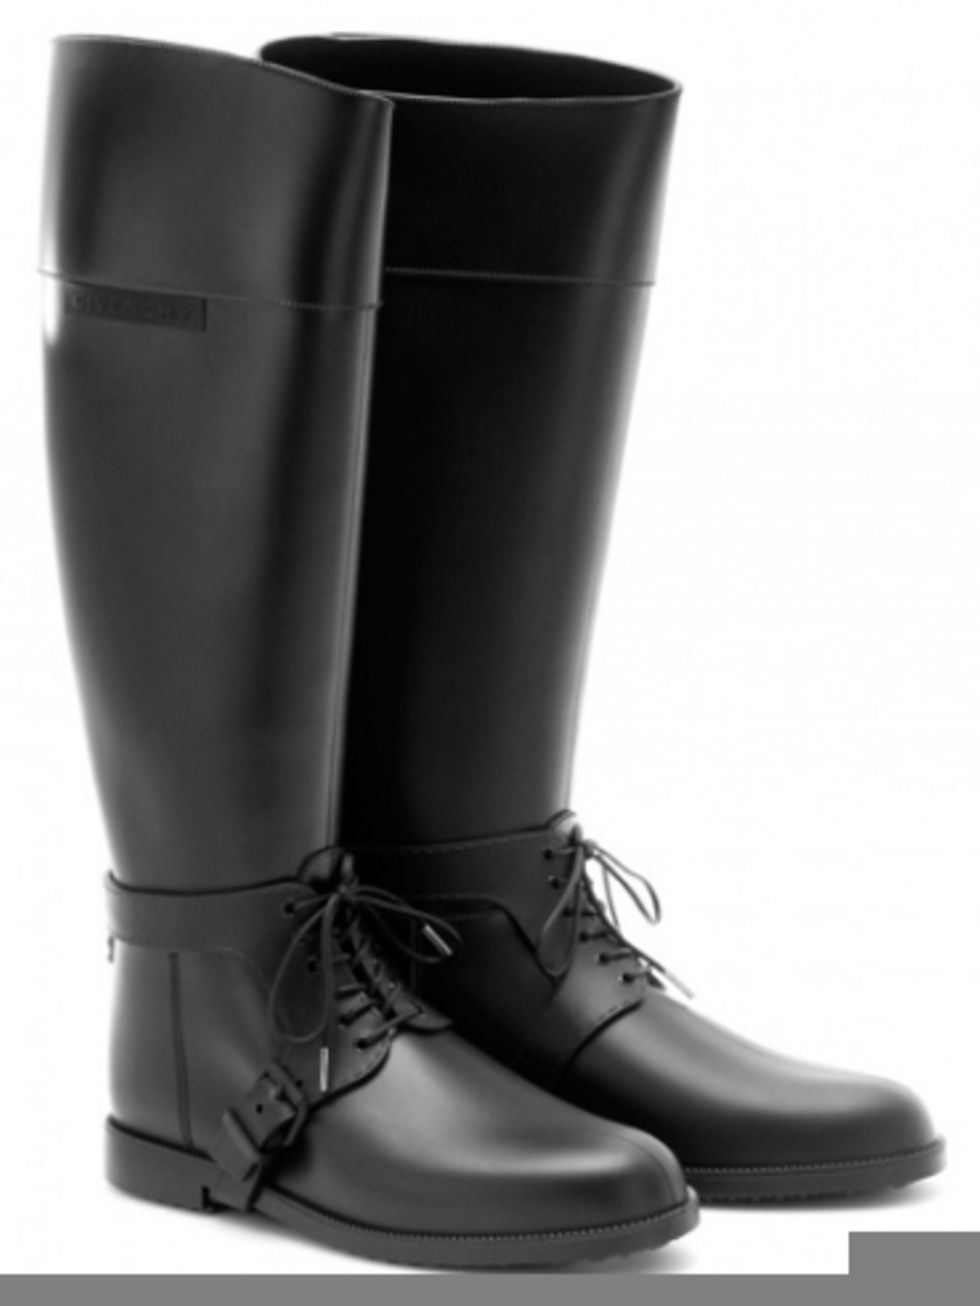 Shoe, White, Boot, Black, Leather, Cylinder, Still life photography, Silver, Knee-high boot, Riding boot, 